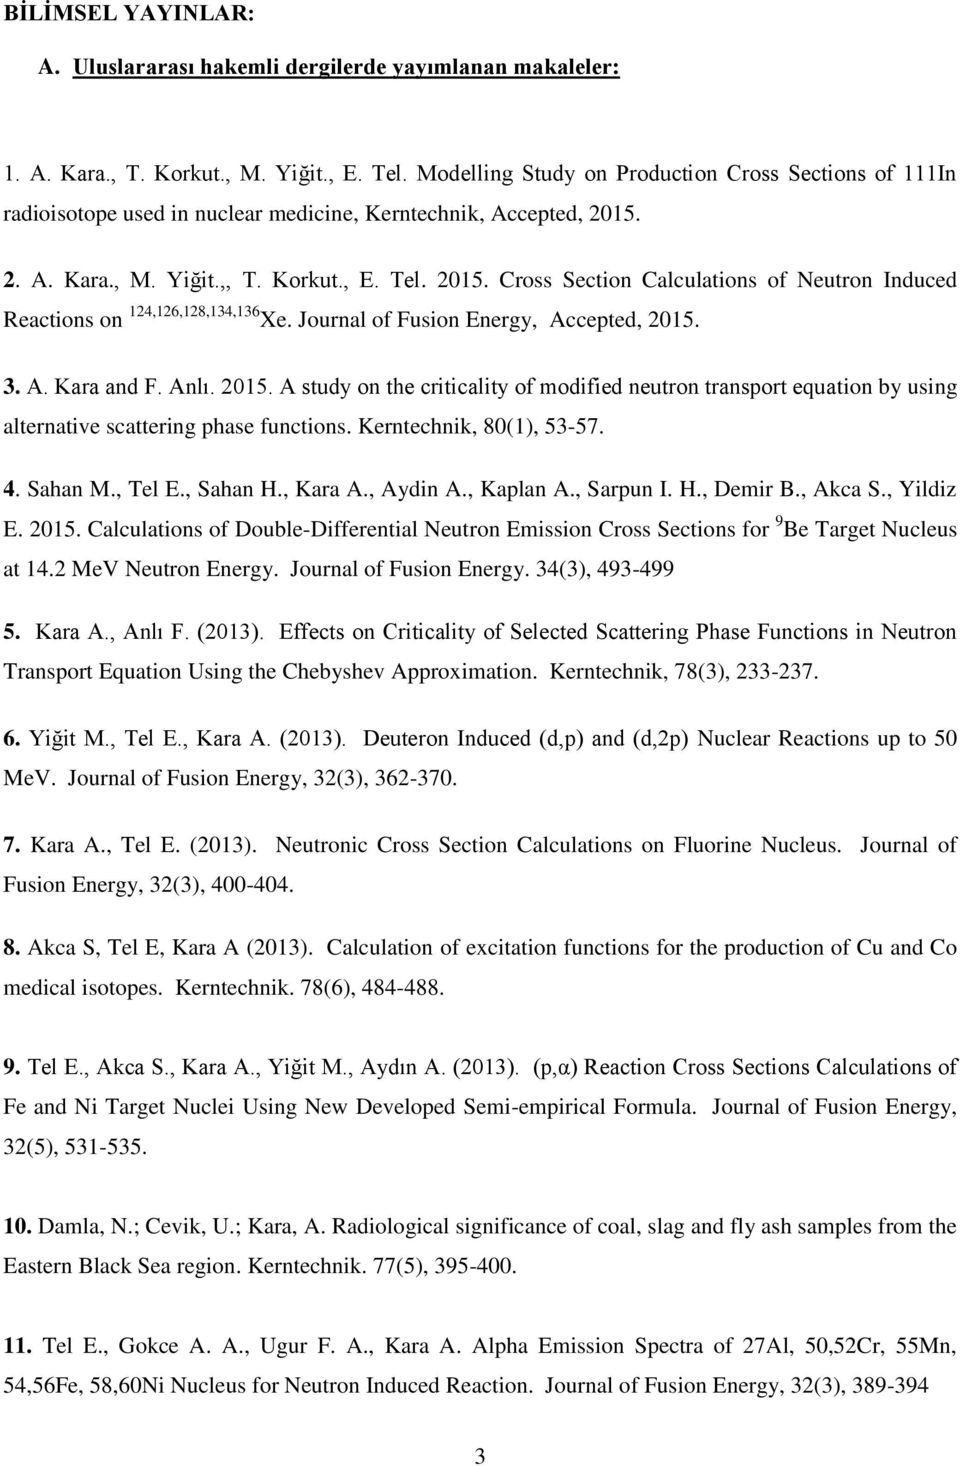 2. A. Kara., M. Yiğit.,, T. Korkut., E. Tel. 2015. Cross Section Calculations of Neutron Induced Reactions on 124,126,128,134,136 Xe. Journal of Fusion Energy, Accepted, 2015. 3. A. Kara and F. Anlı.